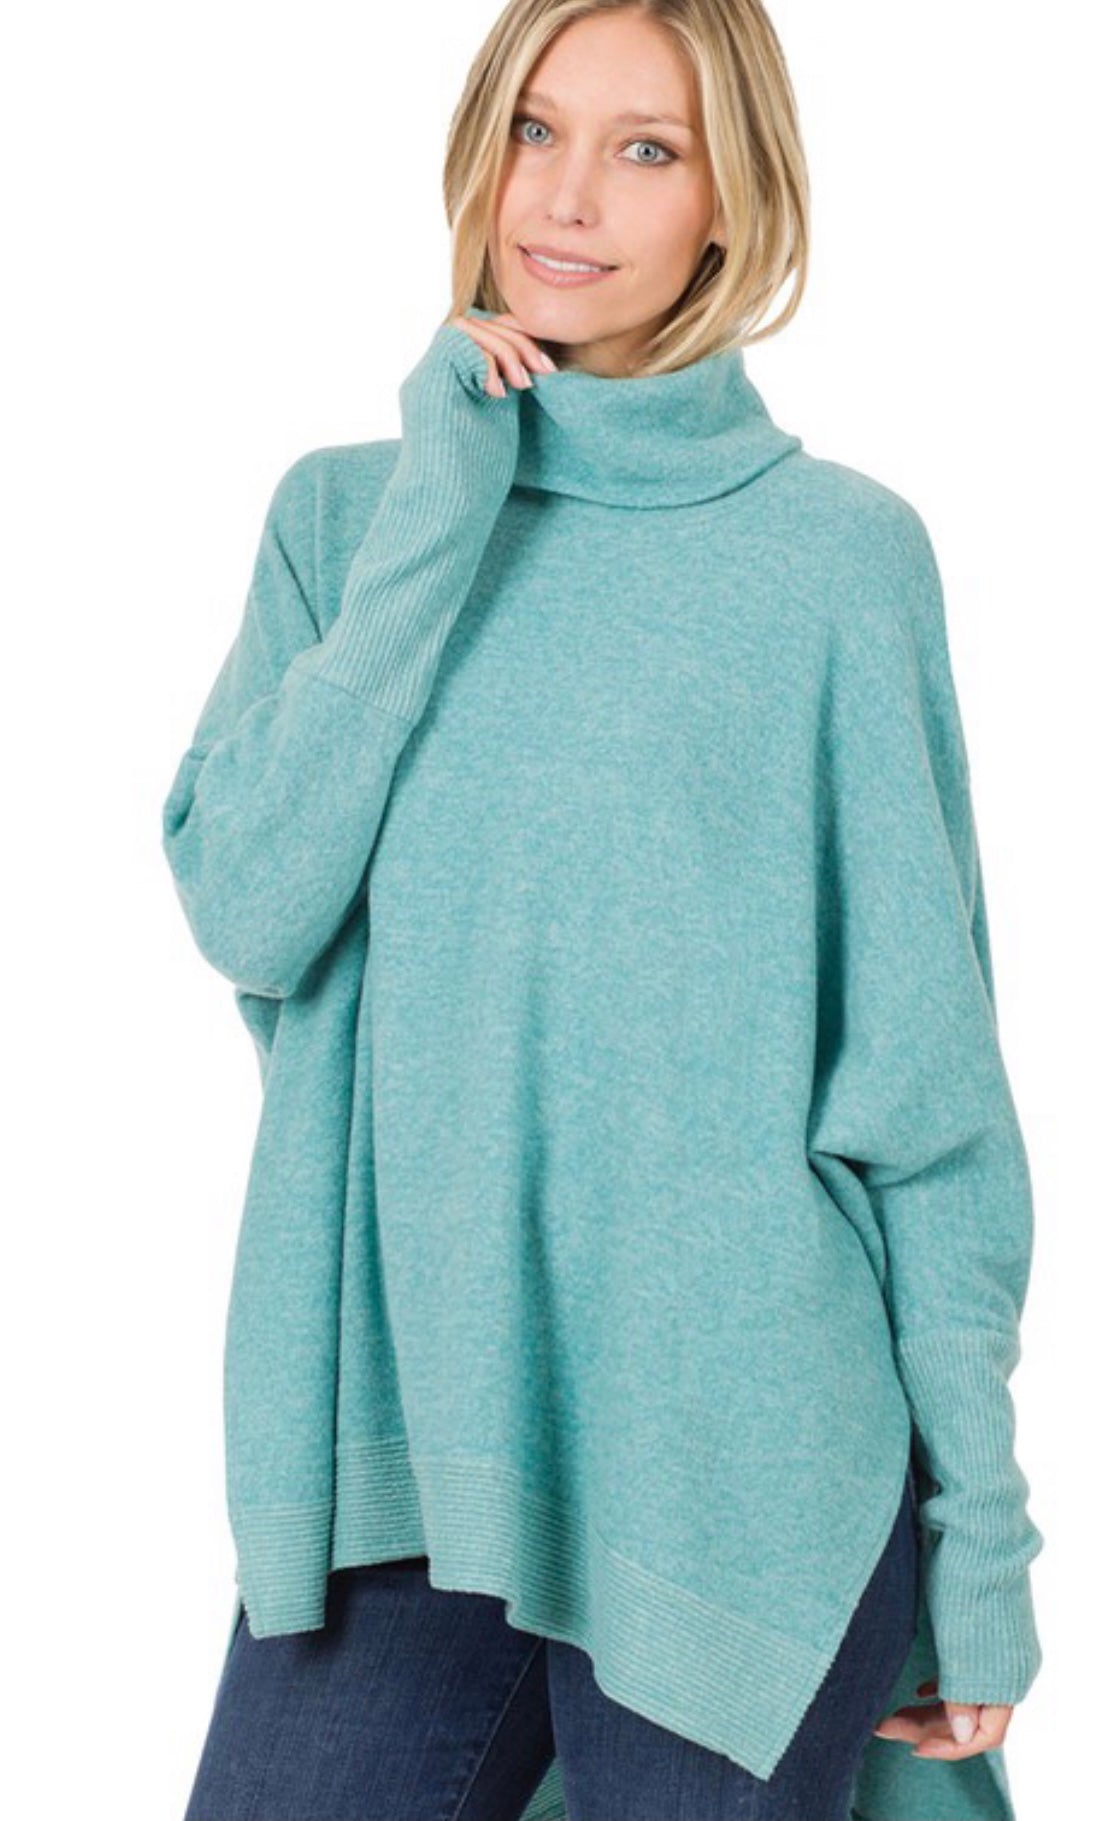 The Sweater You Need In Dusty Teal